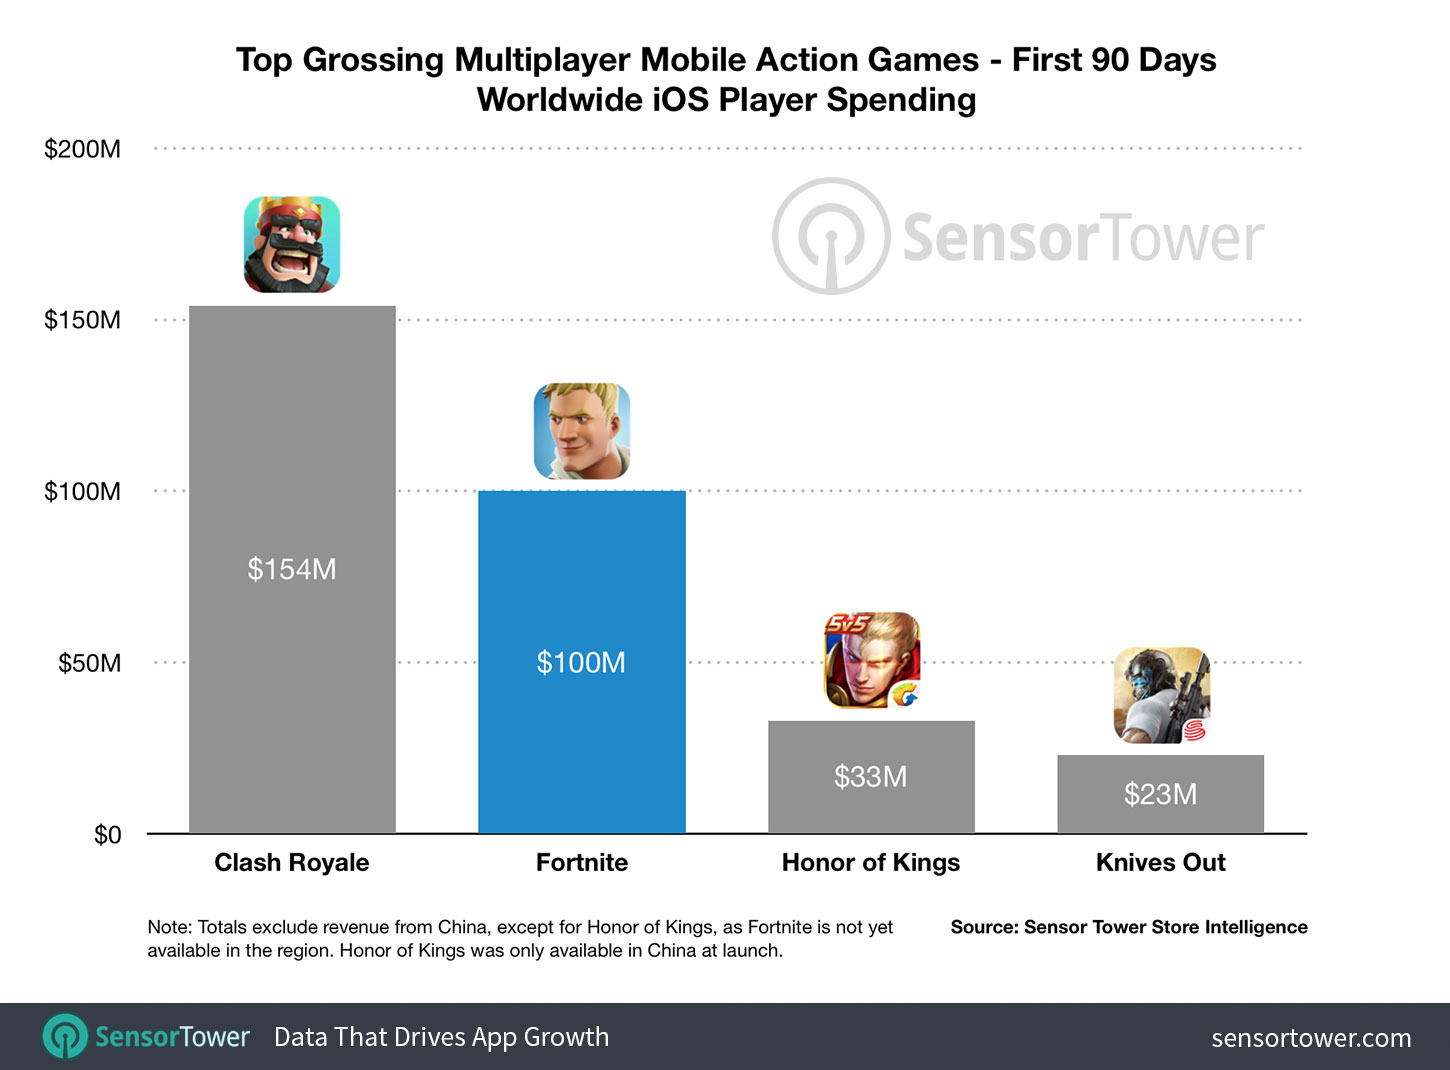 Chart showing Fortnite's gross revenue on iOS in its first 90 days compared to other top grossing mobile multiplayer games